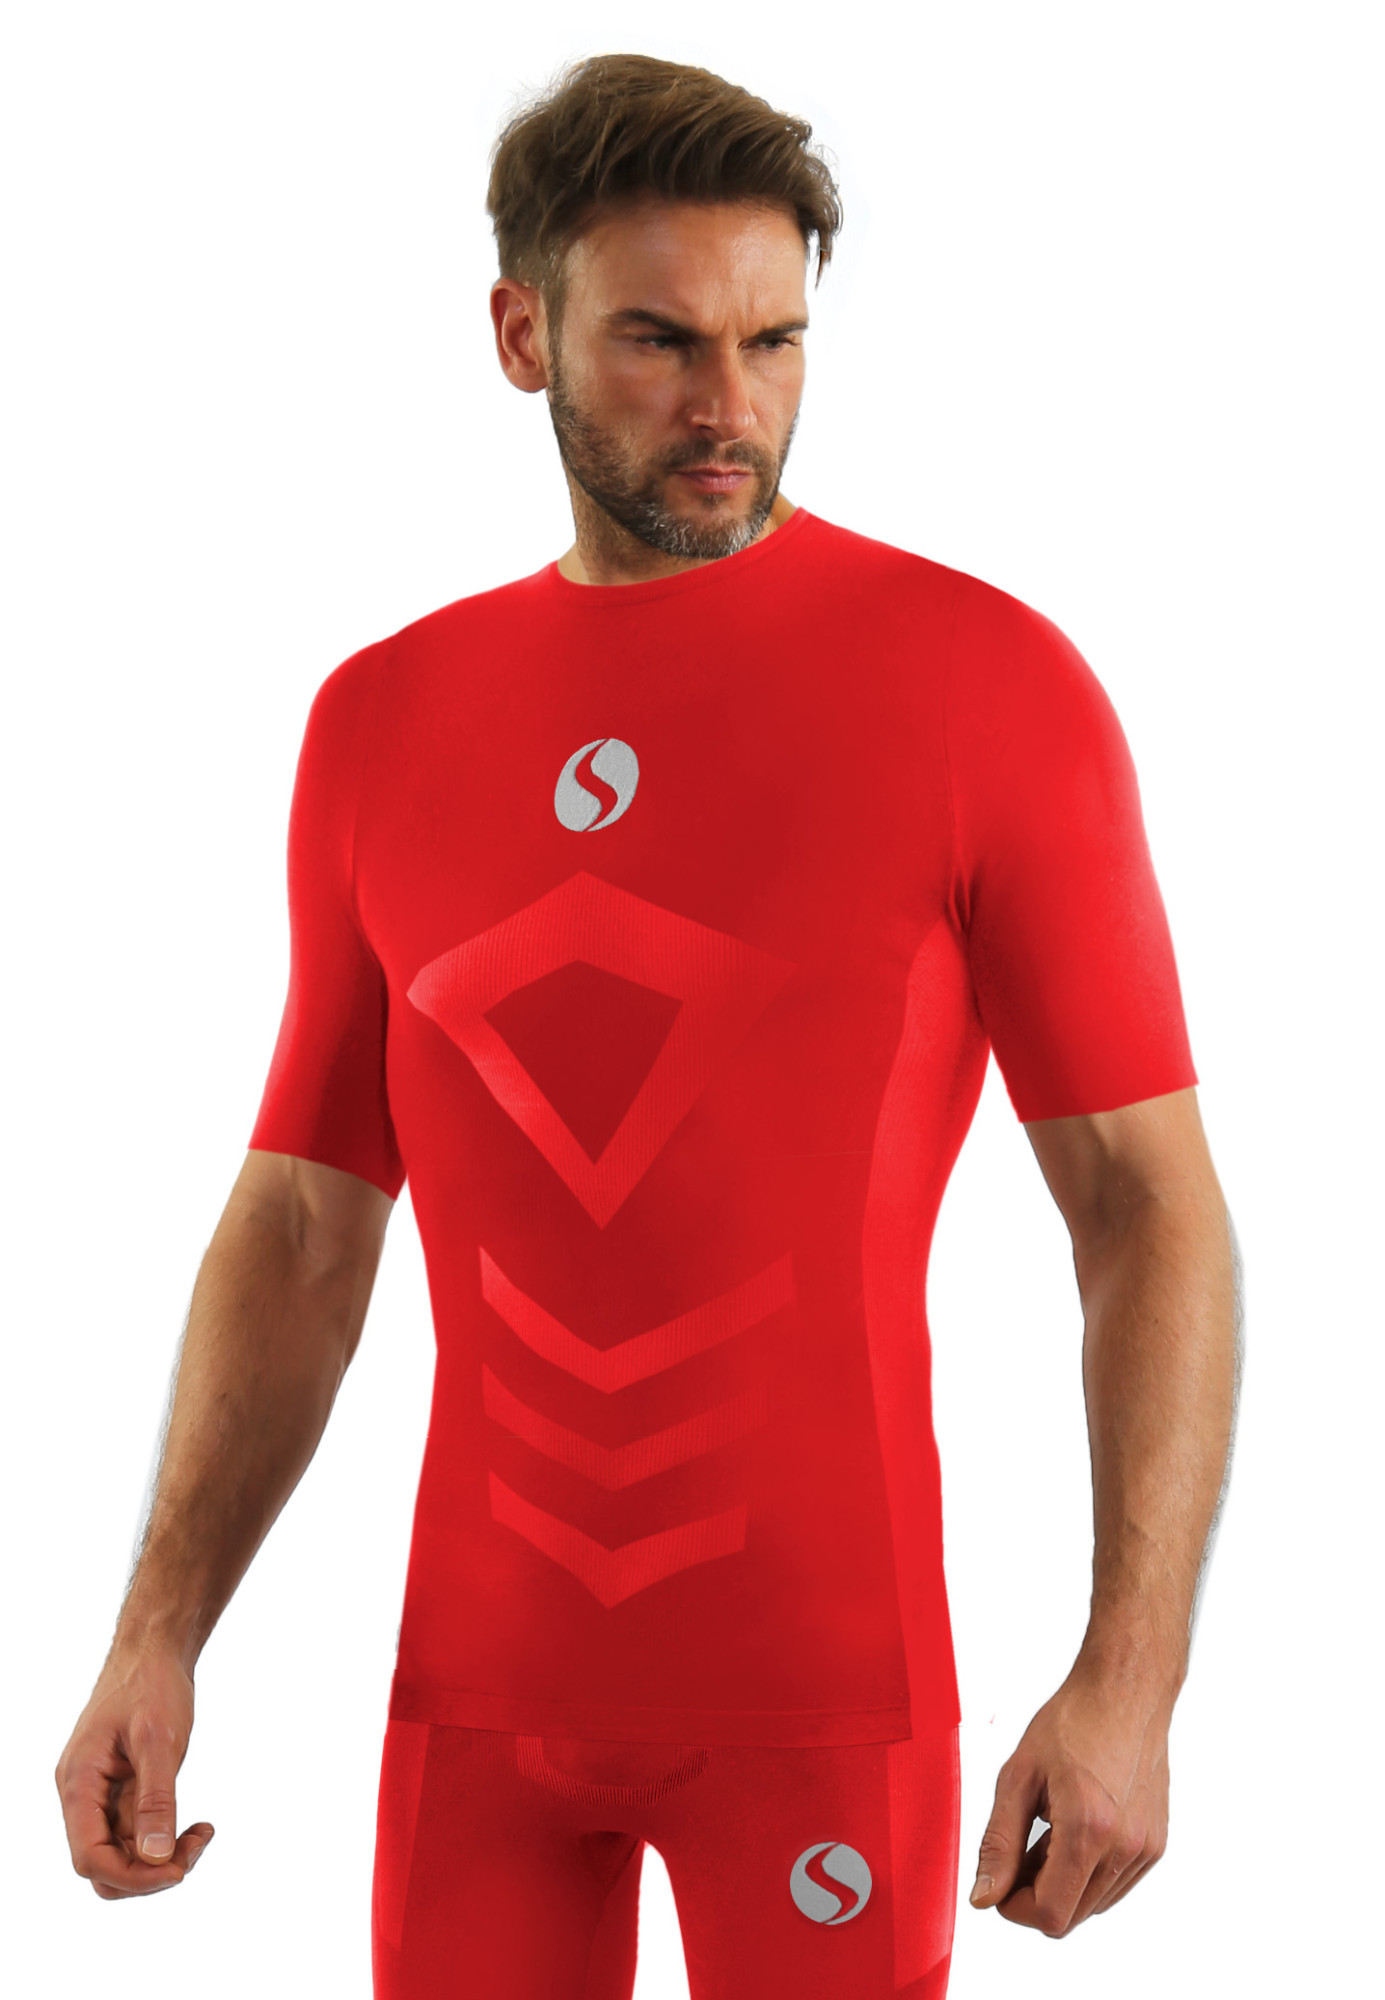 Sesto Senso Thermo Top Short CL39 Red L/XL